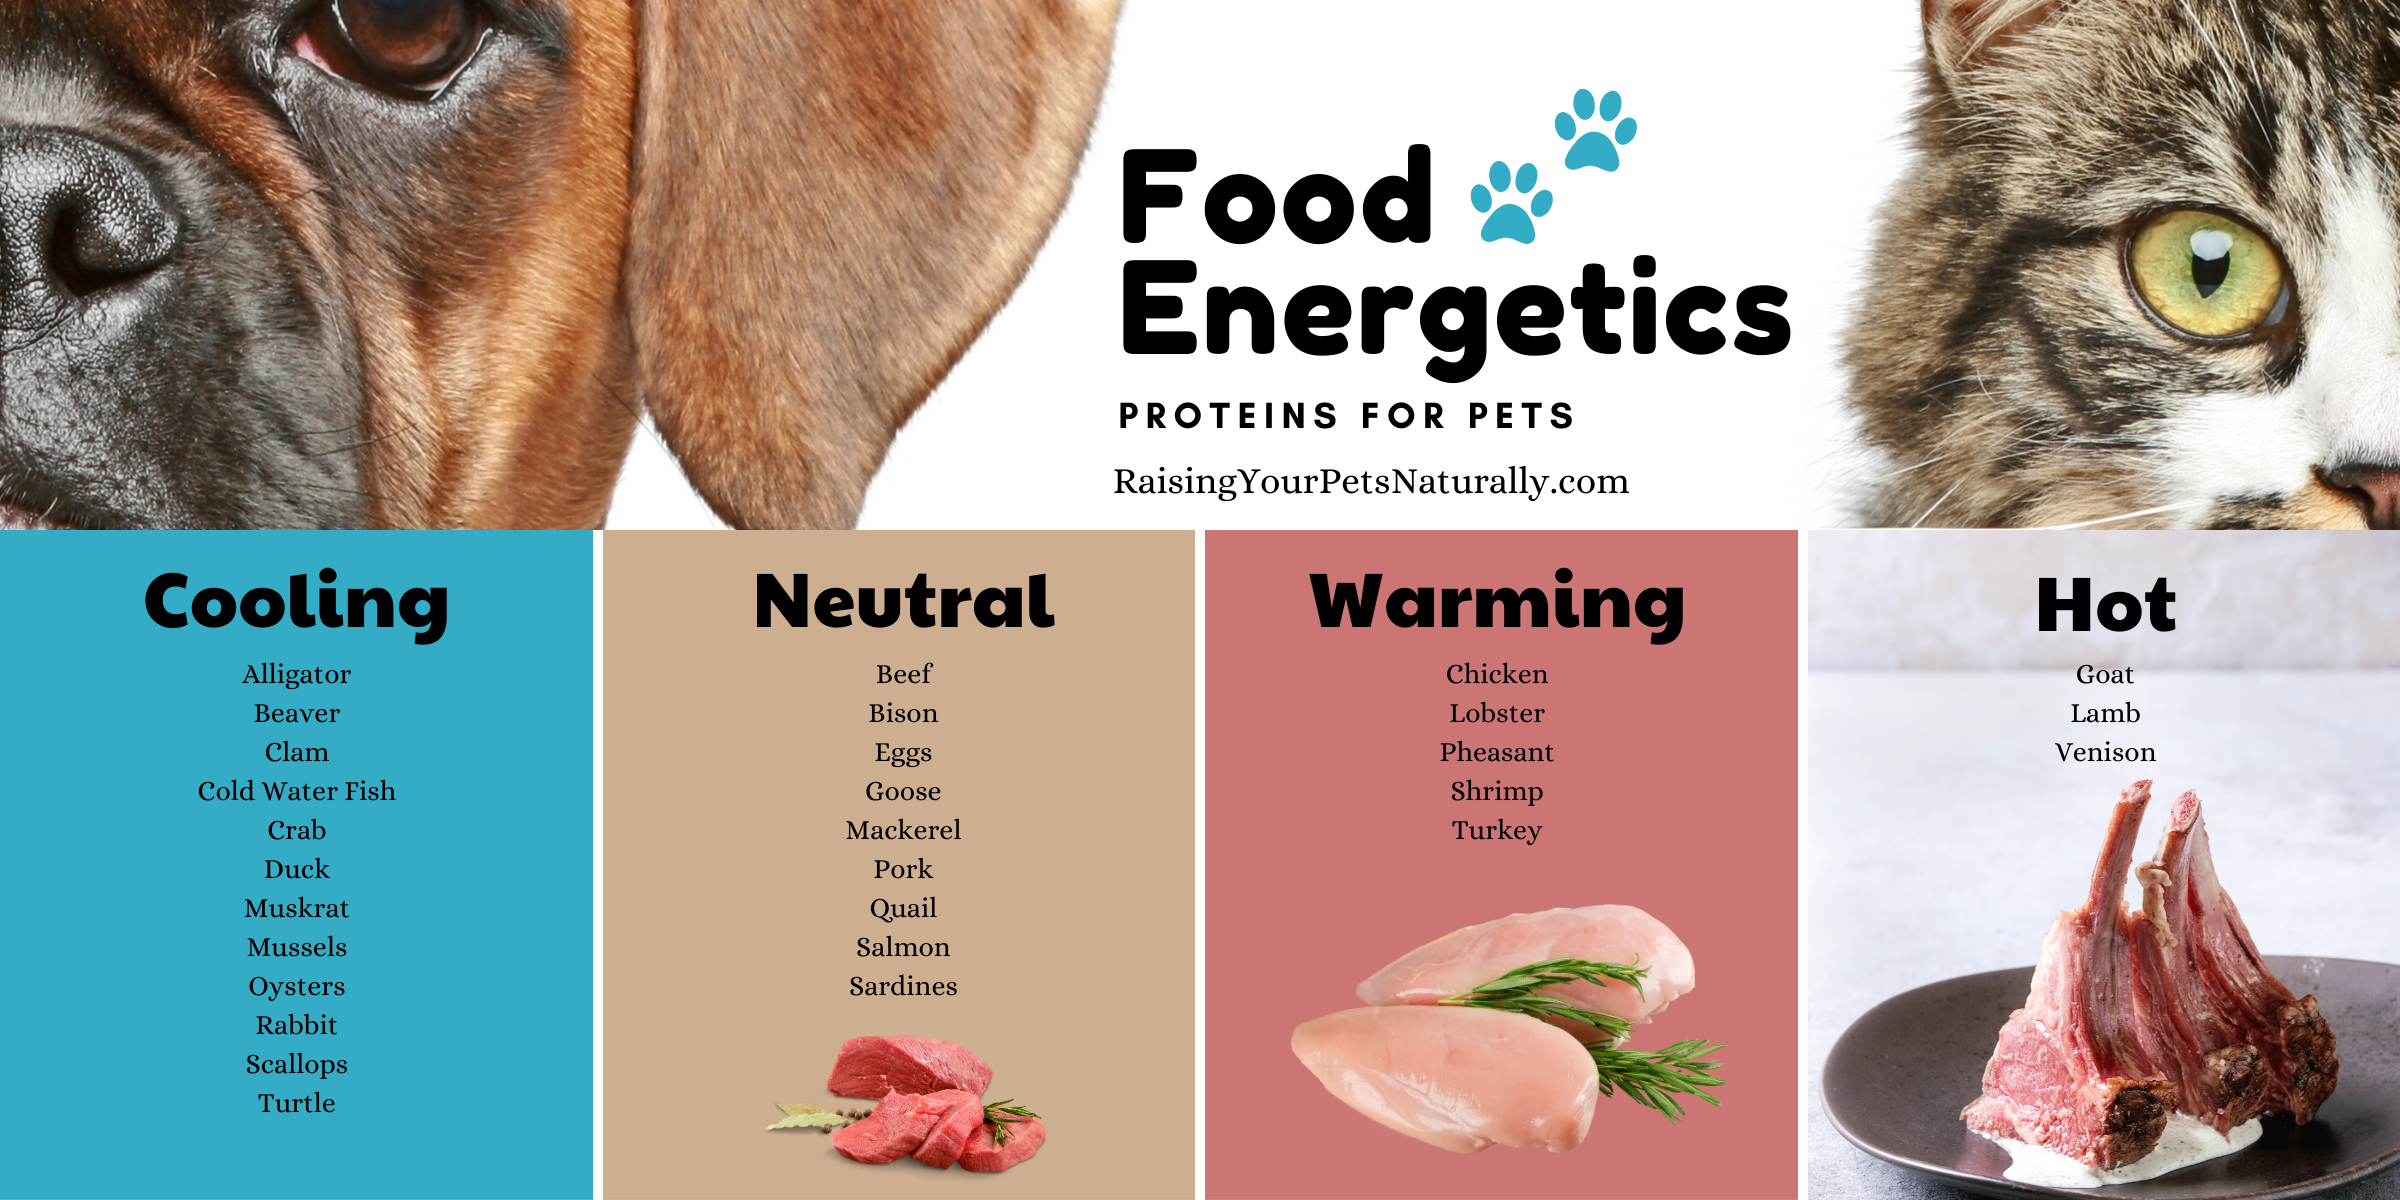 Energetics of various proteins for pets